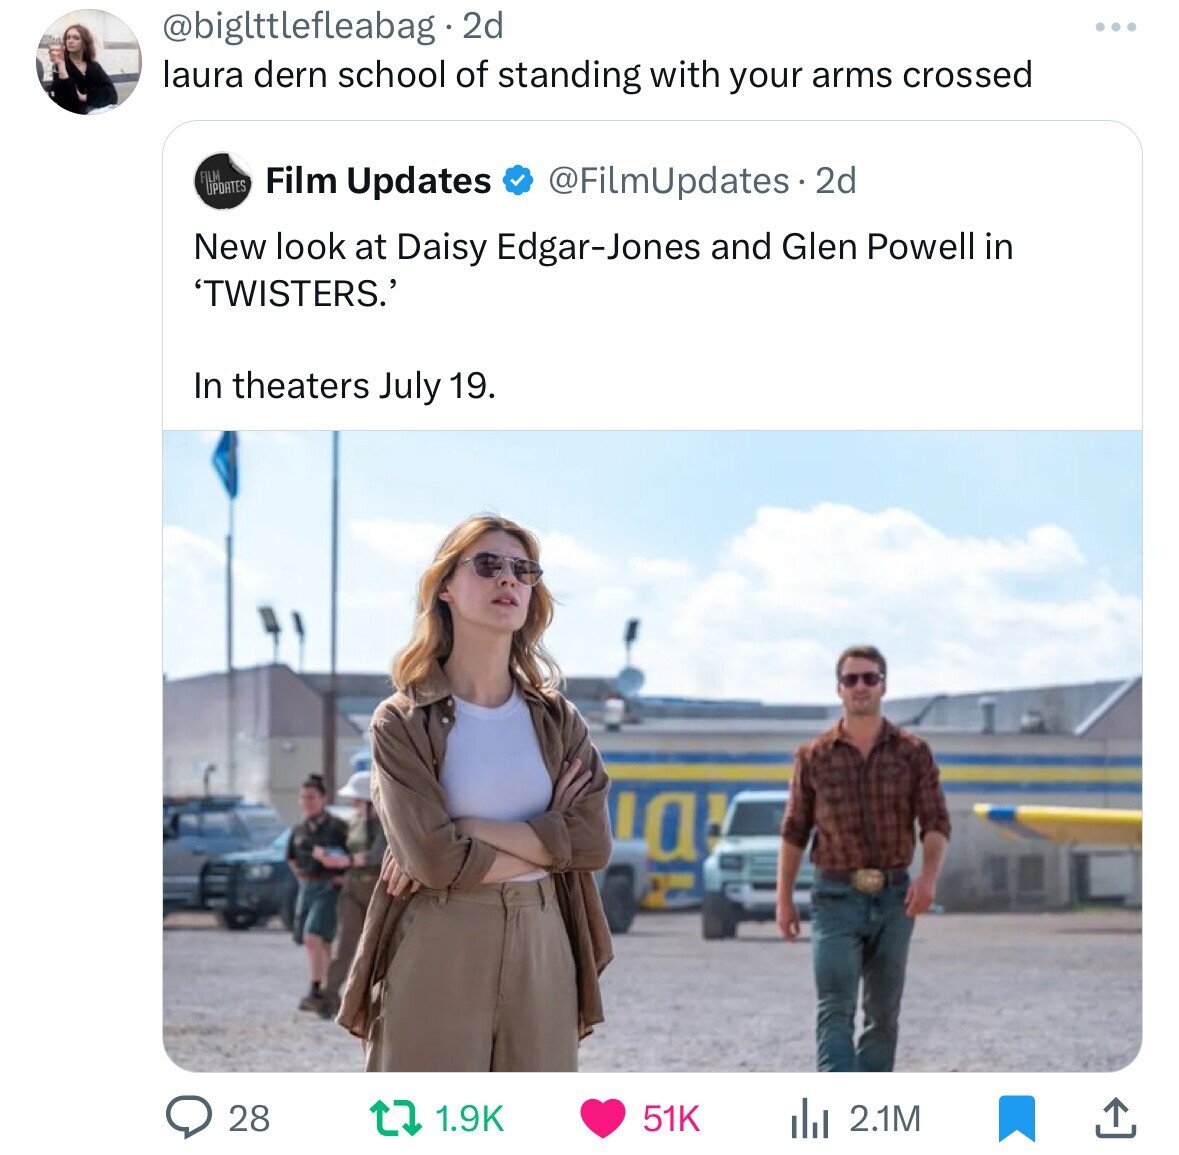 Twisters - . 2d laura dern school of standing with your arms crossed Updates Has Film Updates Updates 2d New look at Daisy EdgarJones and Glen Powell in 'Twisters.' In theaters July 19. Lo > 28 t 51K ili 2.1M